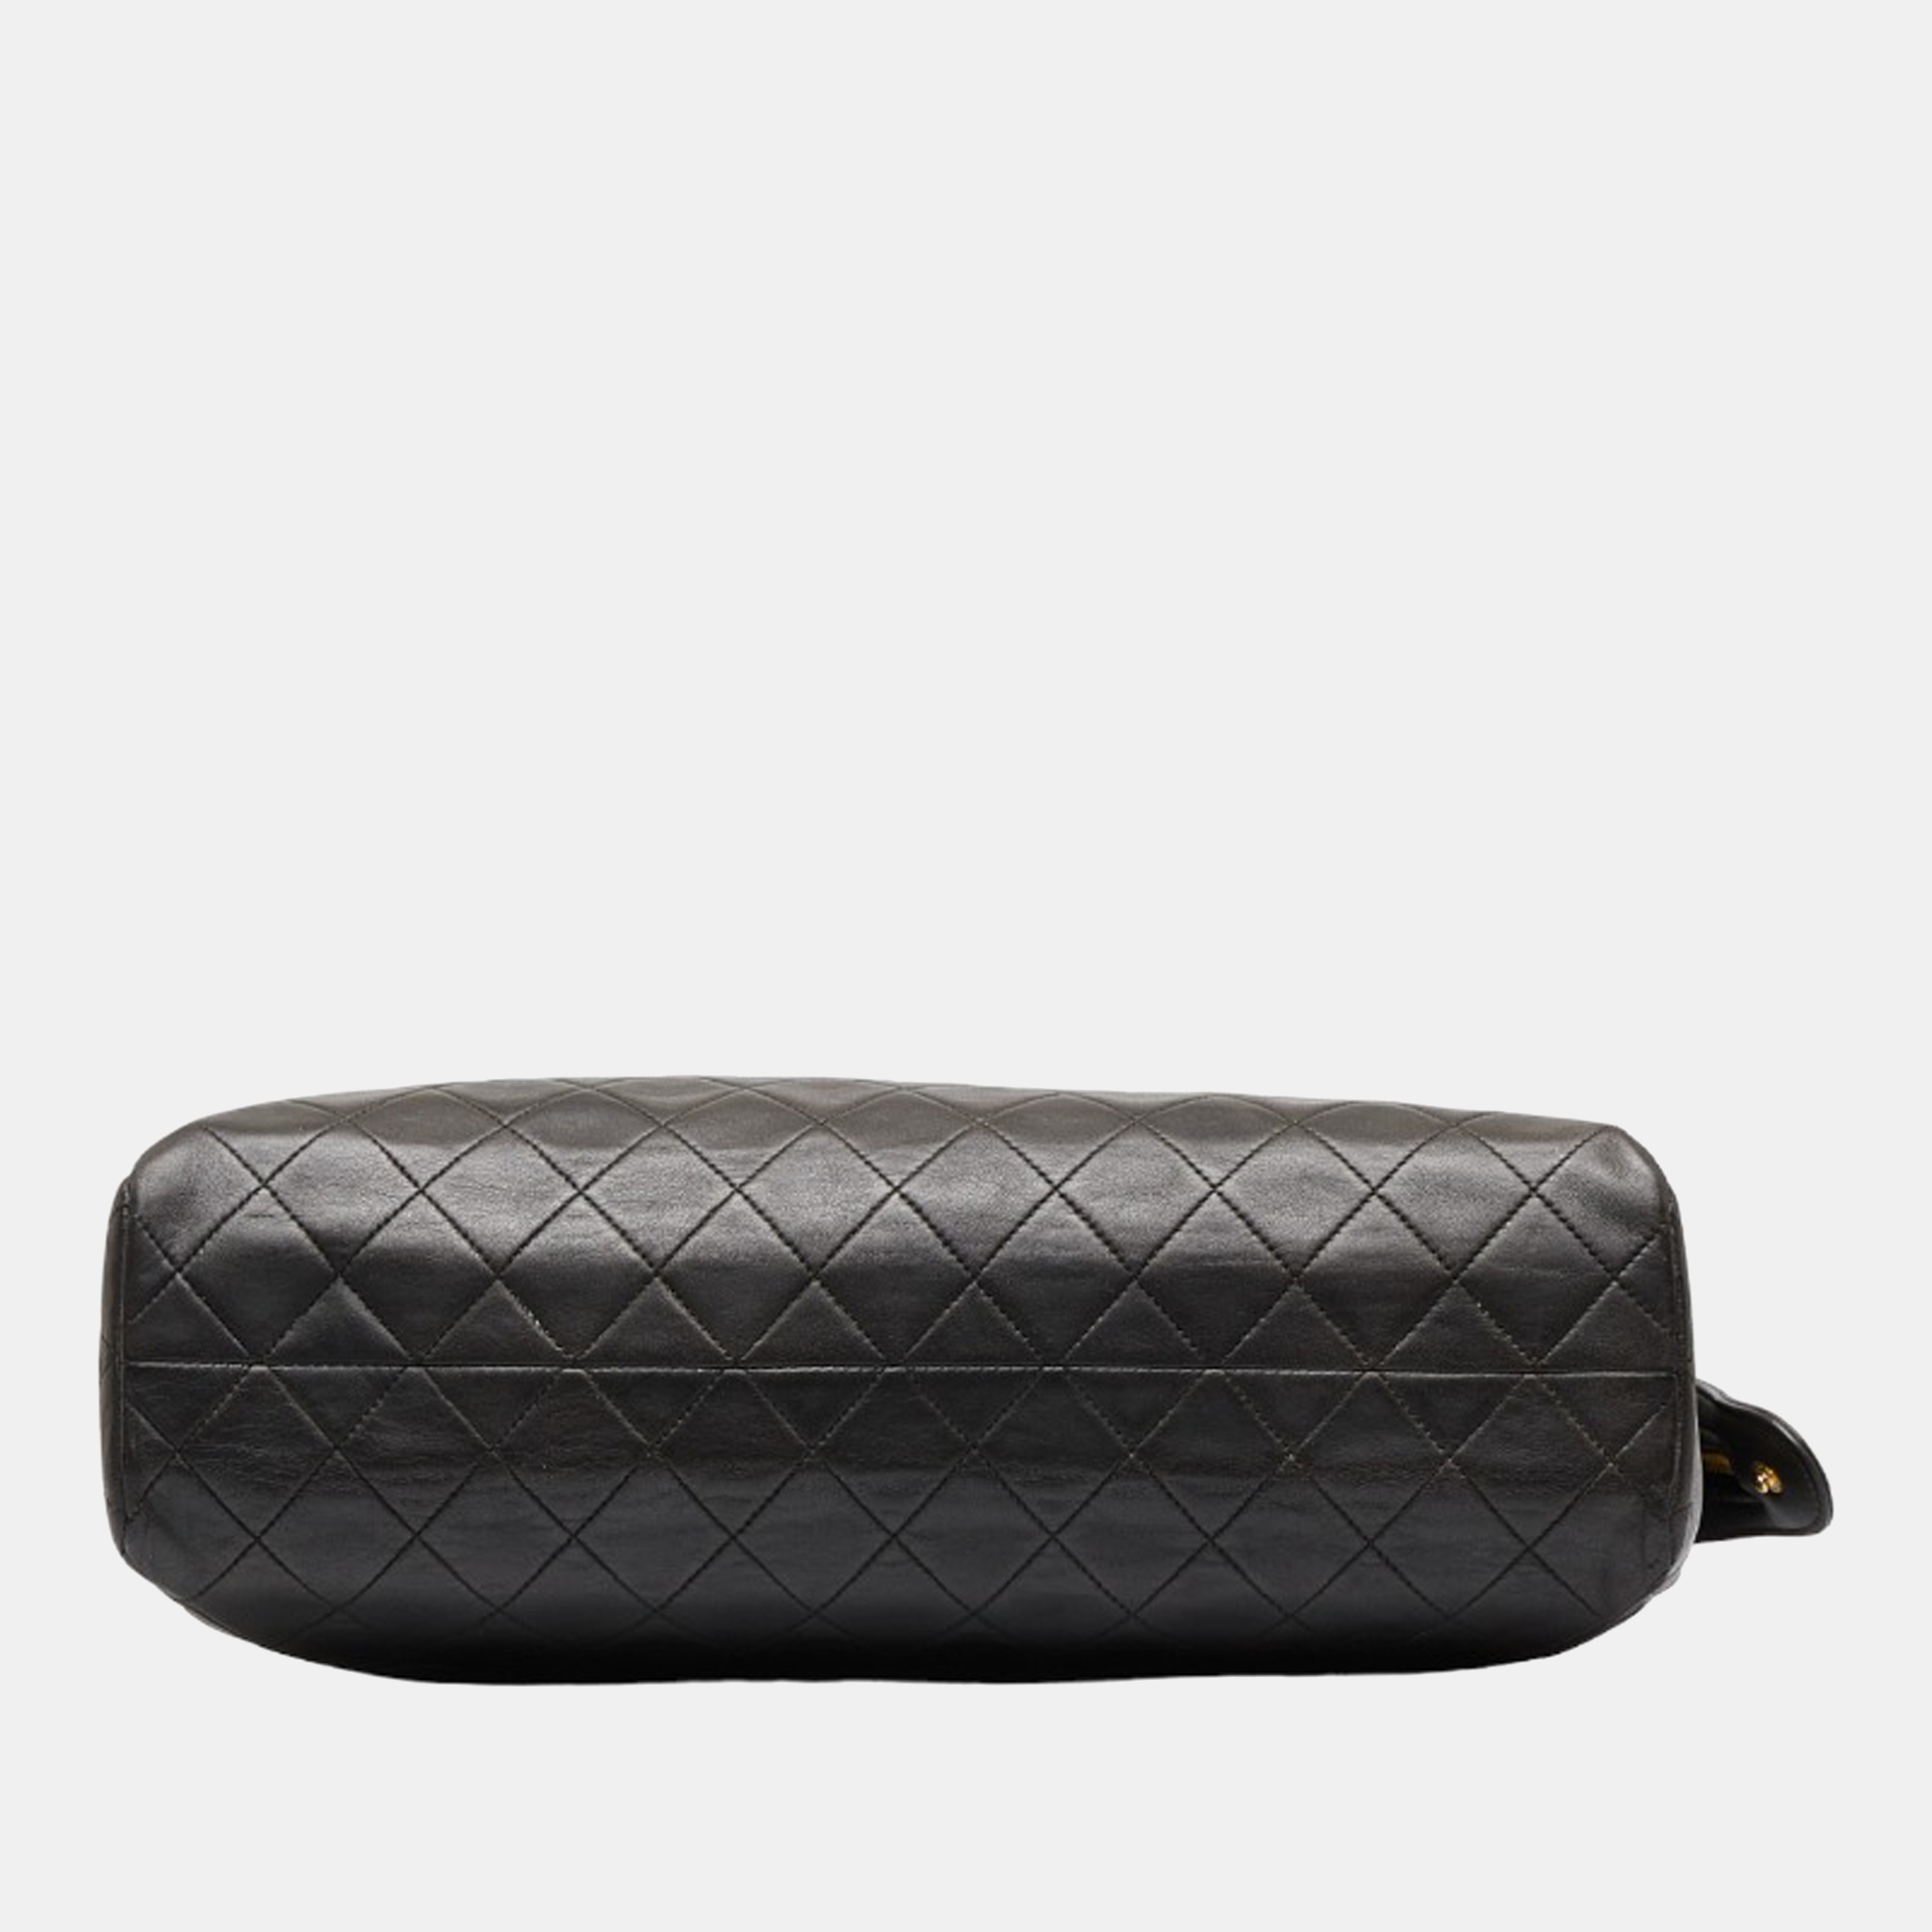 Chanel Black CC Quilted Leather Chain Shoulder Bag